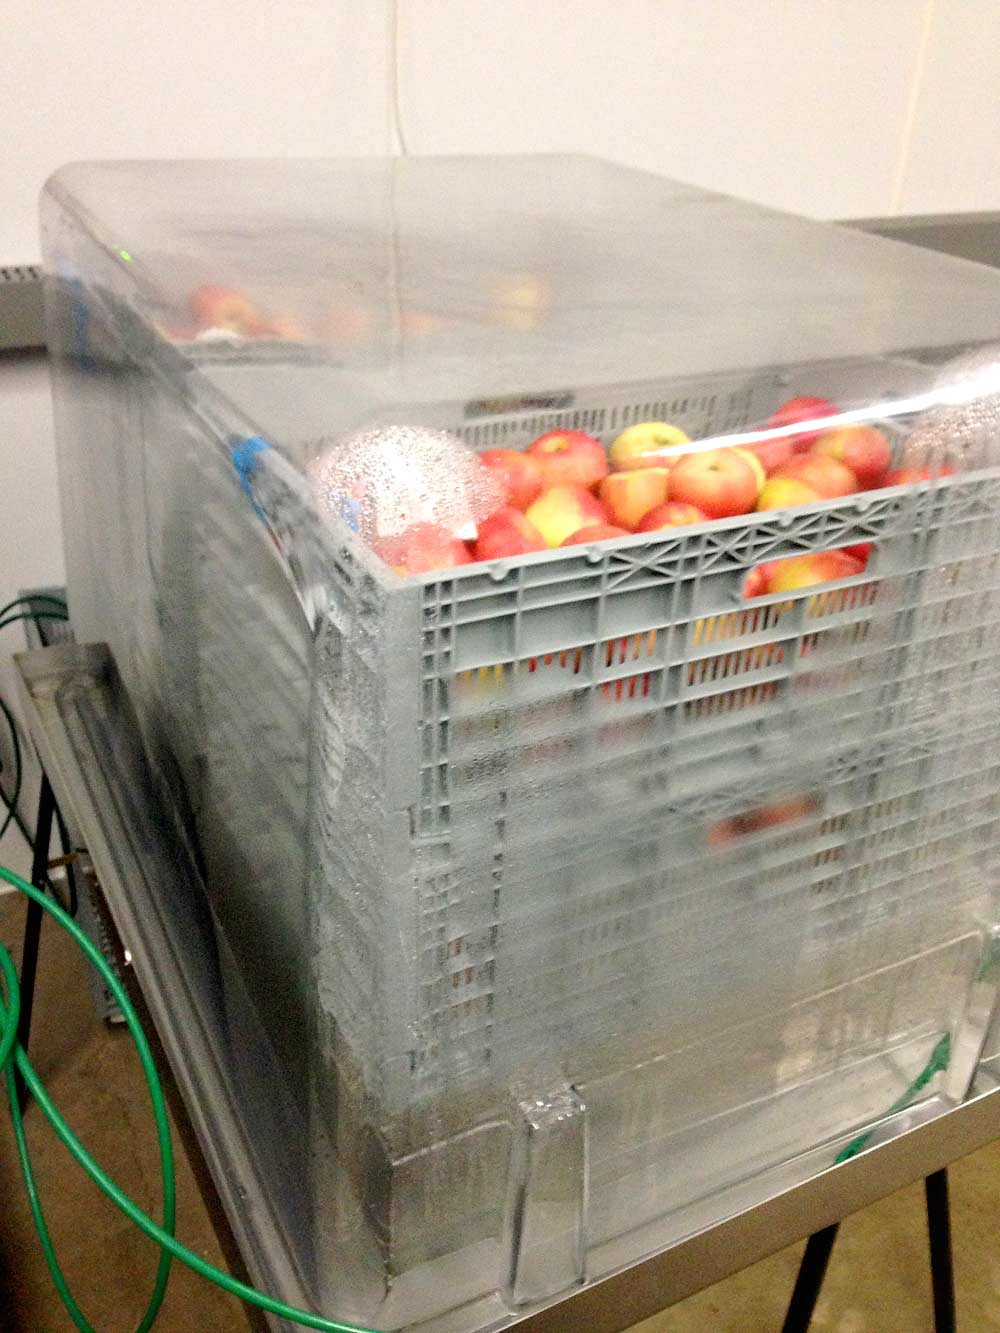 Honeycrisp apples are subjected to ultra-low oxygen storage in a SafePod as part of an experiment to determine their ideal storage environment at the Ontario Ministry of Agriculture, Food and Rural Affairs. <b>(Courtesy Jennifer DeEll)</b>